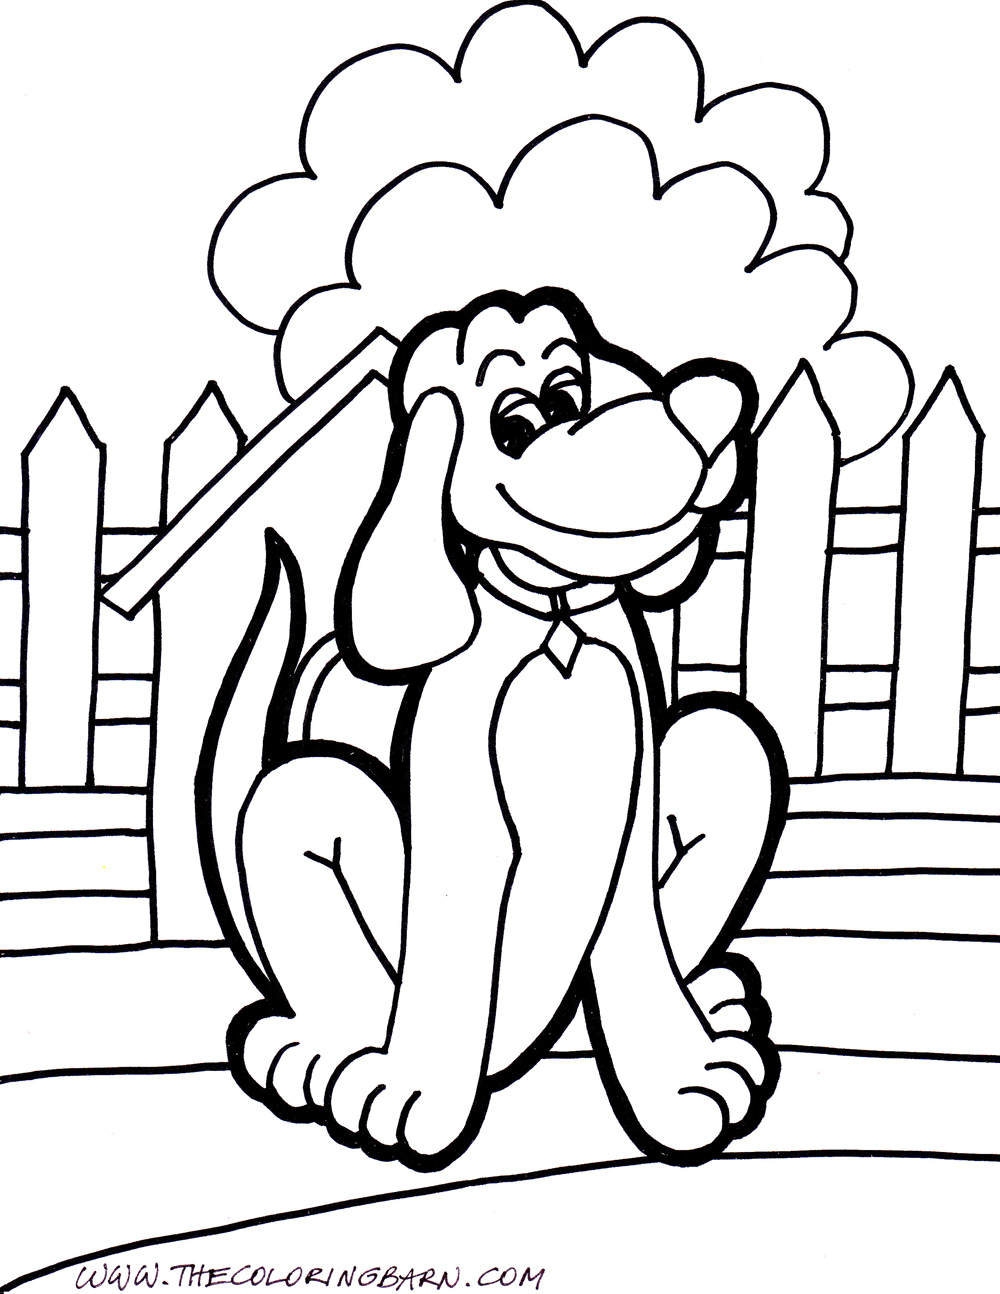 Dog Coloring Pages - The Coloring Barn